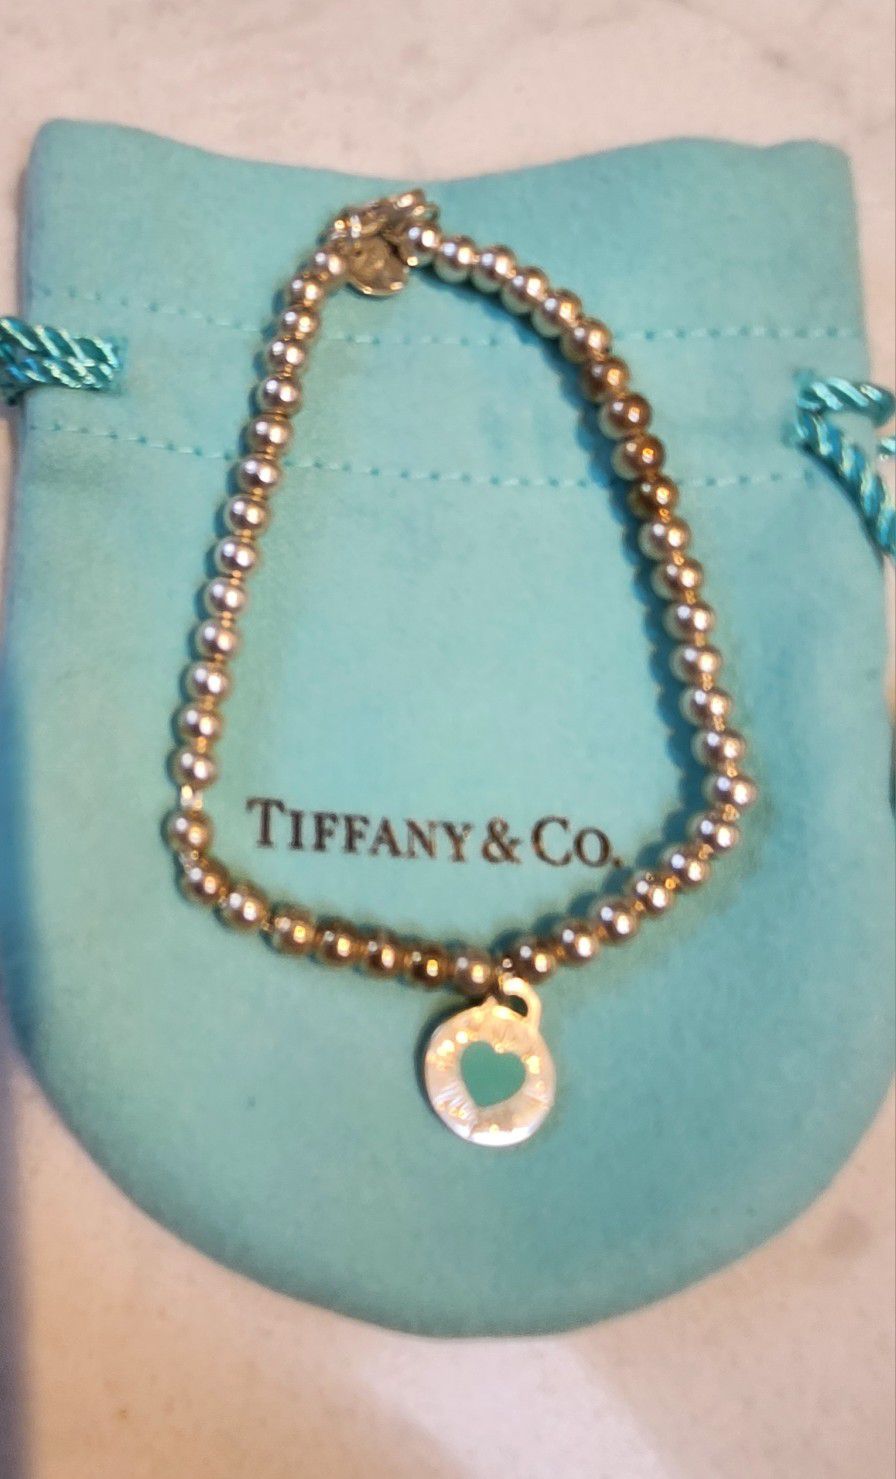 Tiffany and Co. sterling silver bracelet 